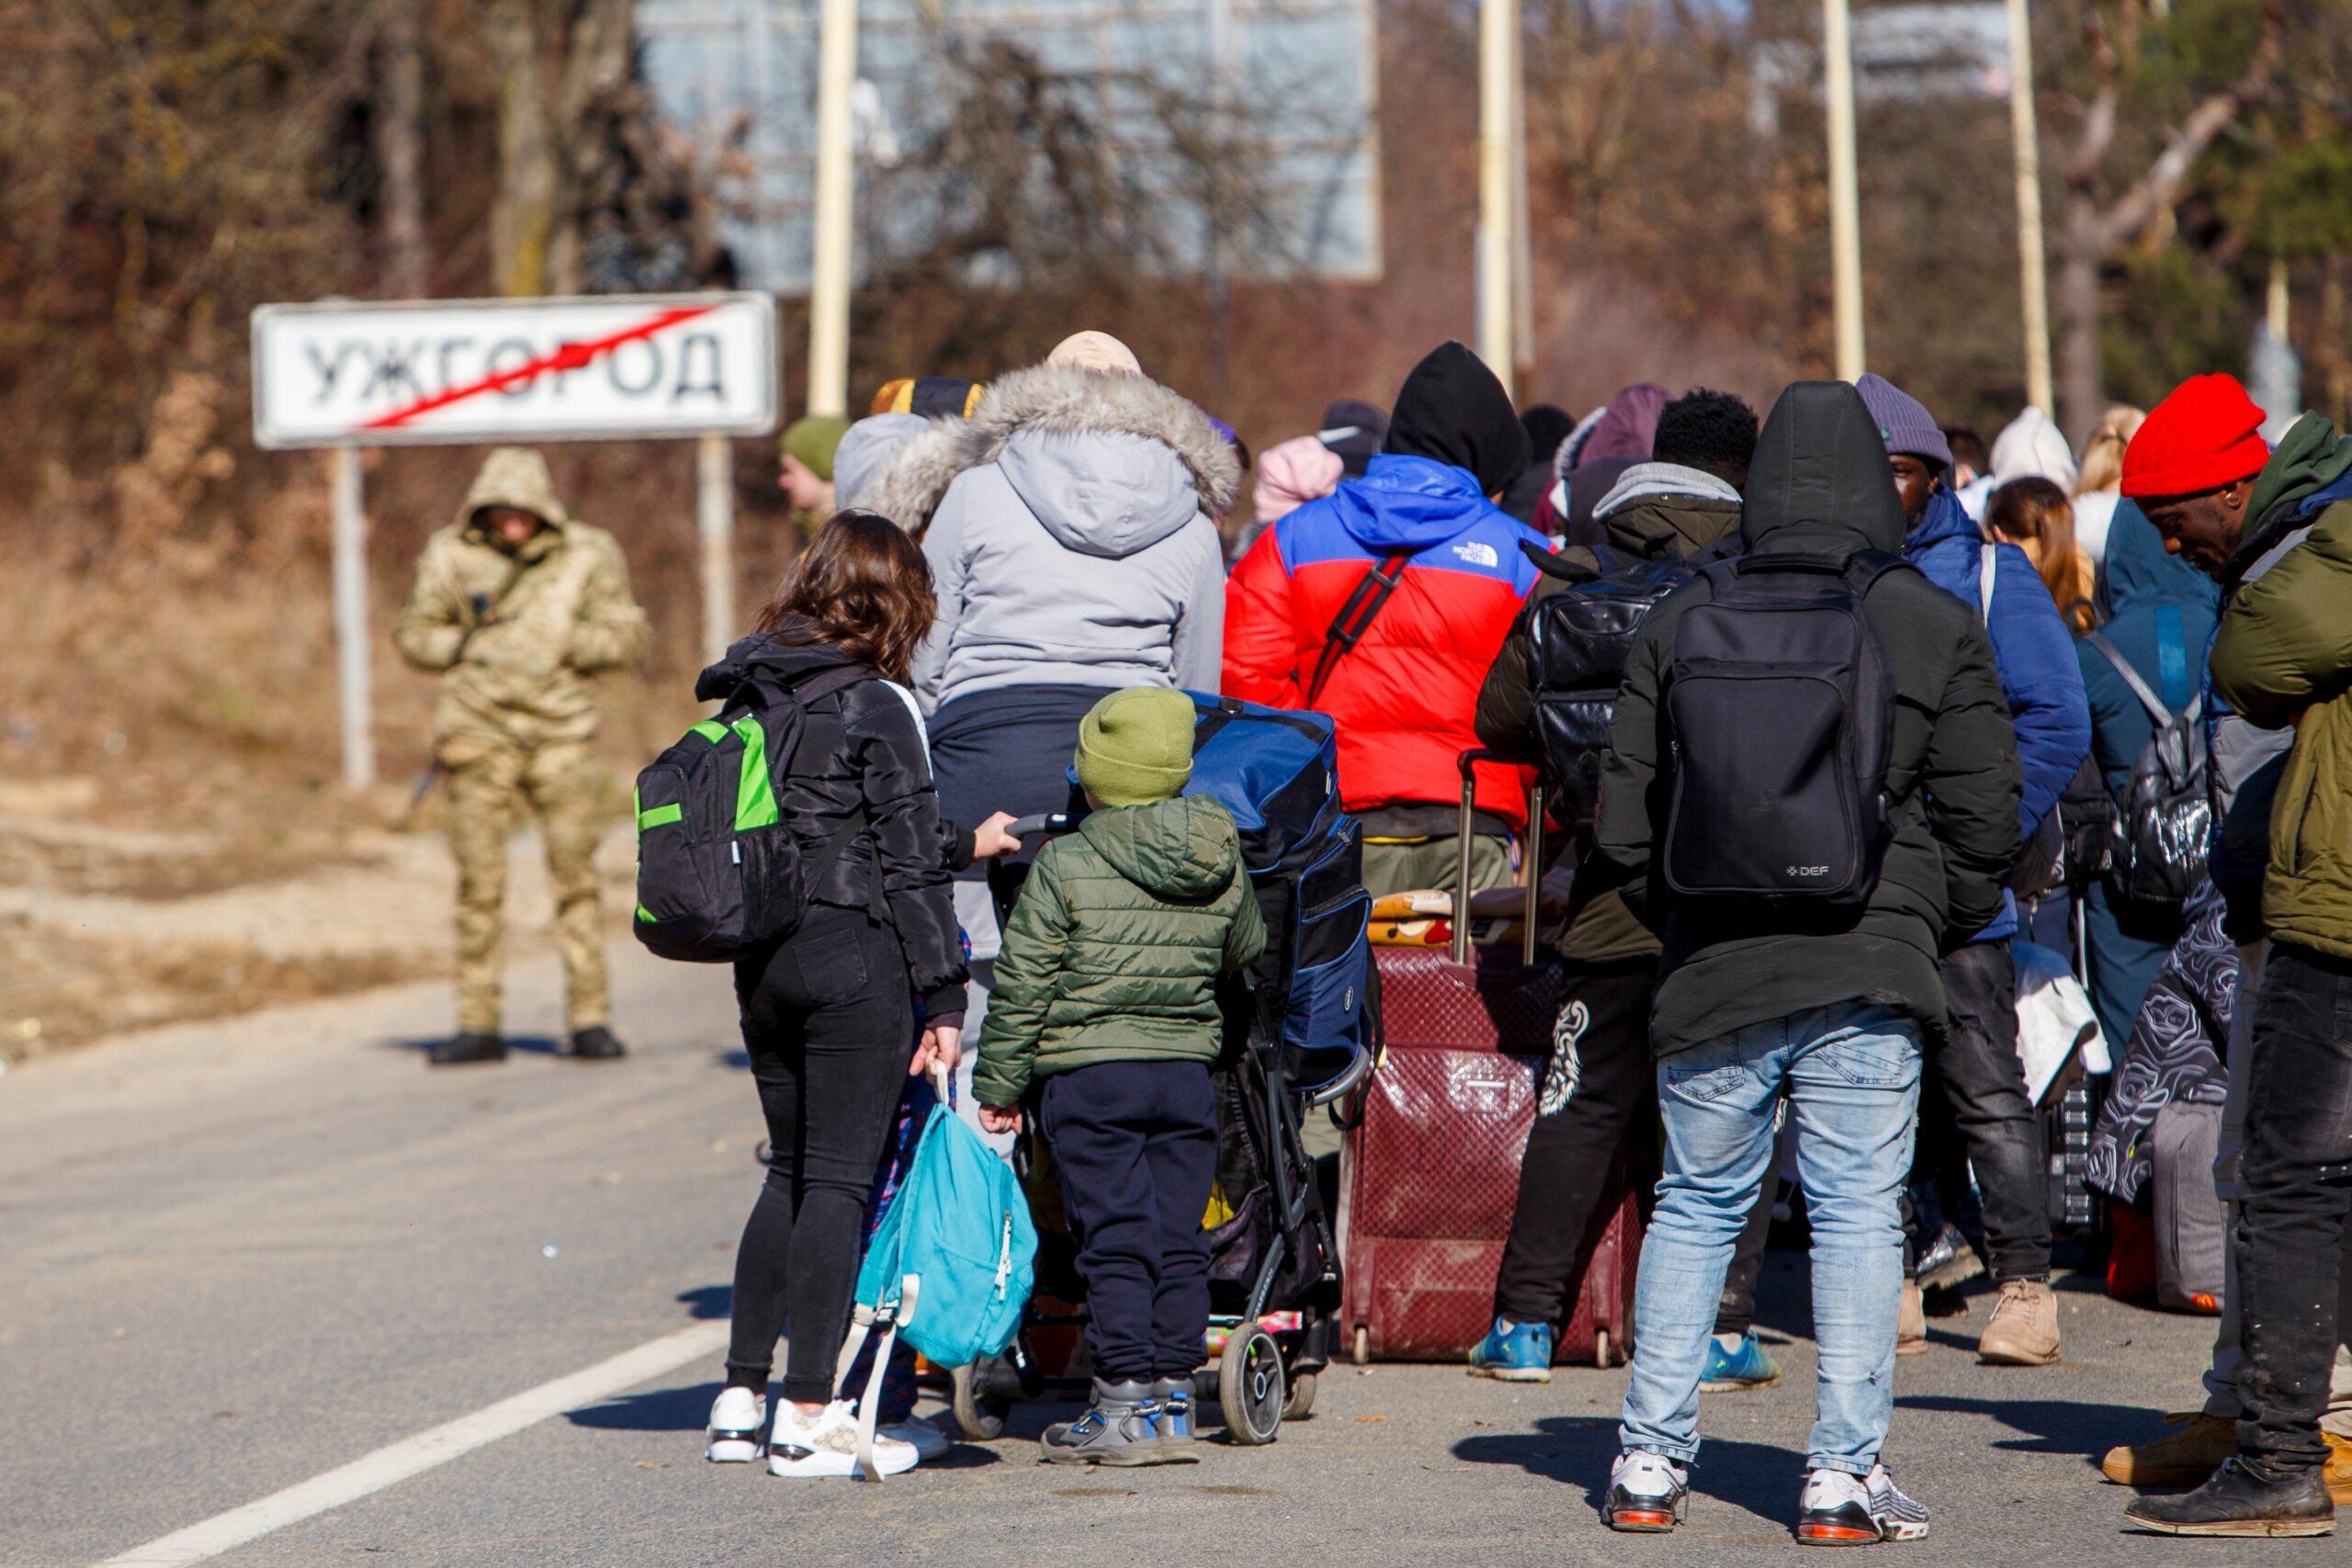 Serbia extended temporary protection for refugees from Ukraine for an additional year